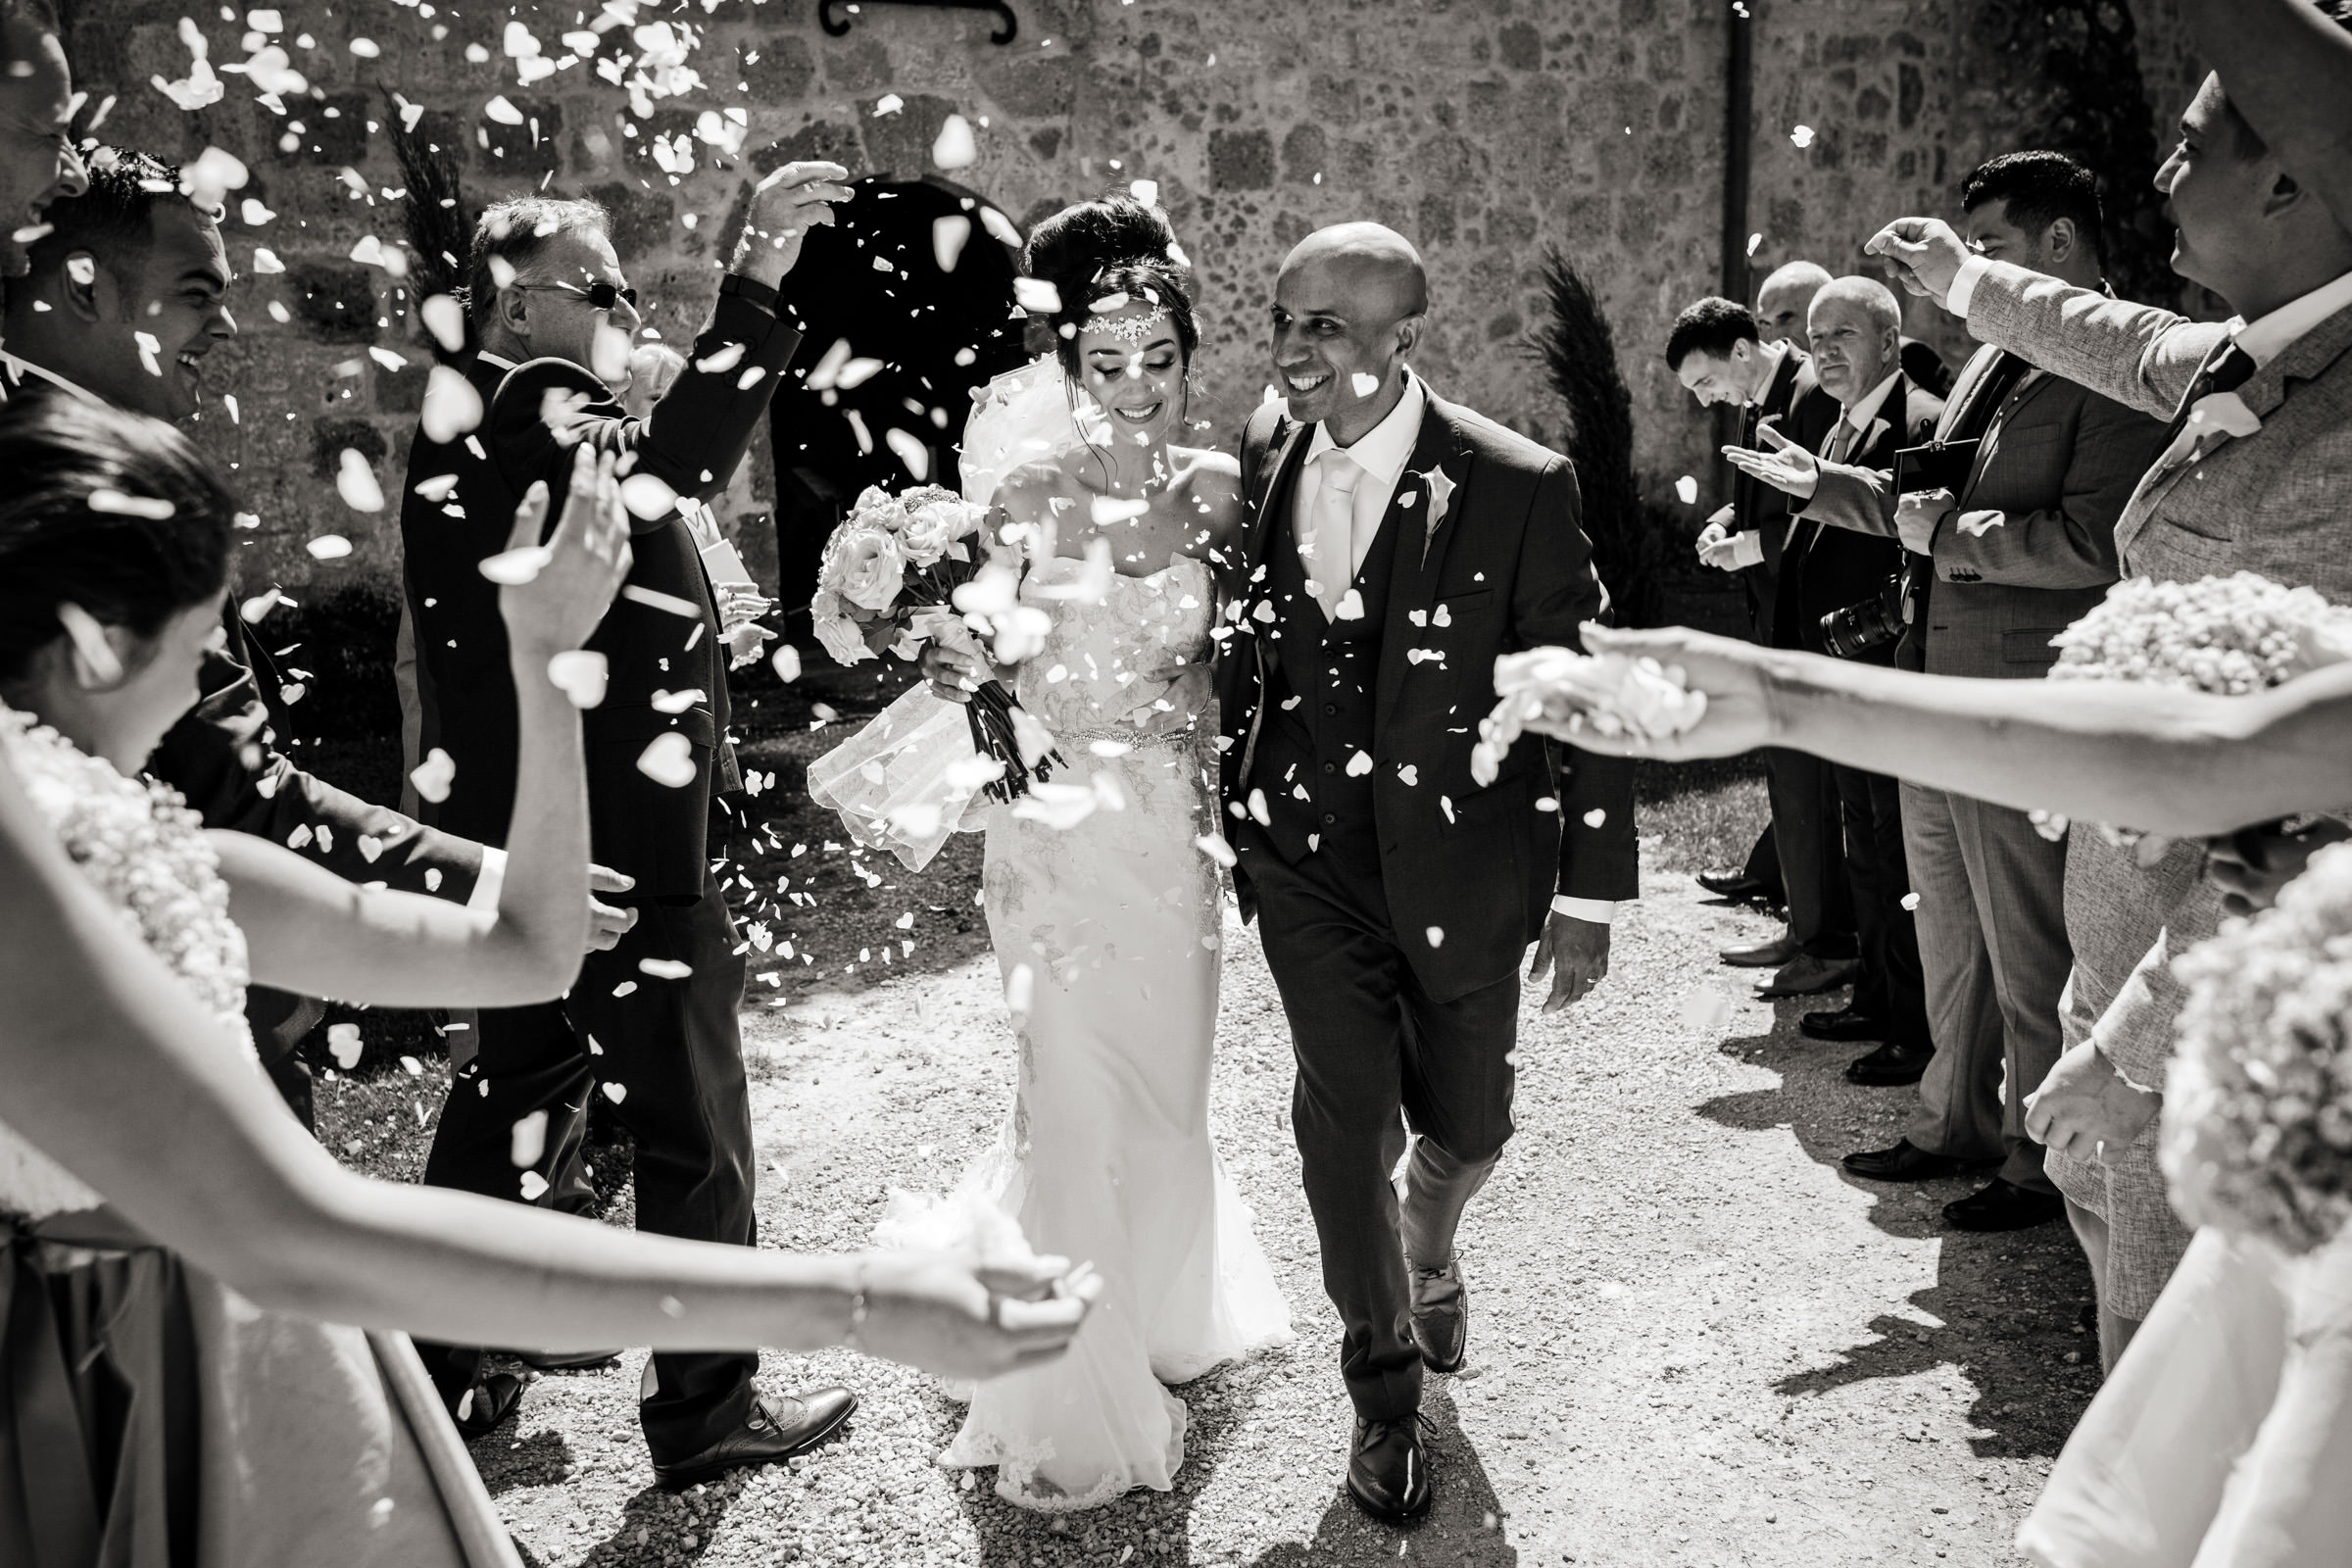 Uk Wedding photographers working at chateau de lisse in gascony 039.jpg